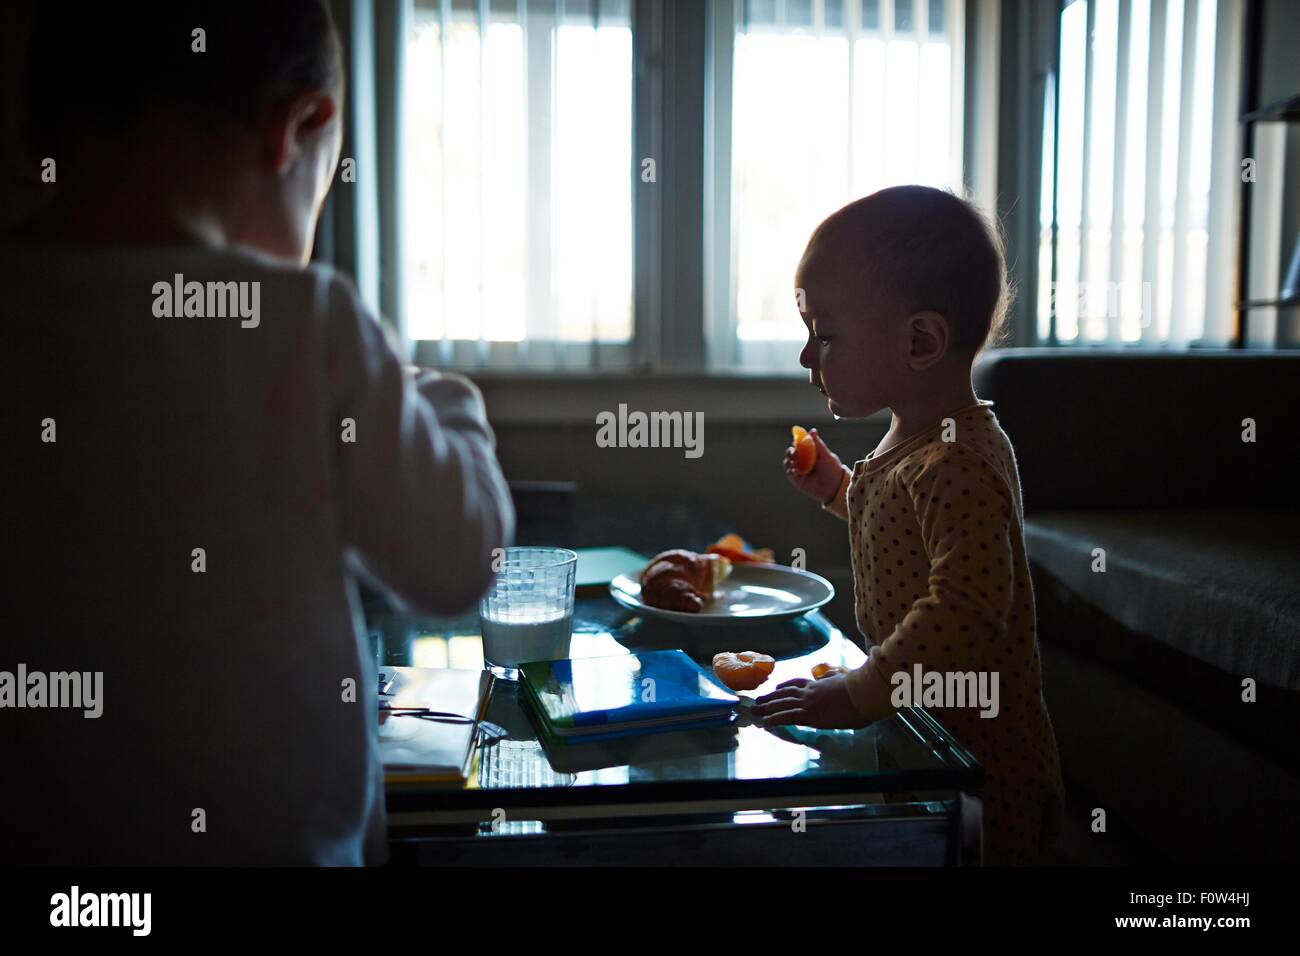 Brothers playing and eating fruits in room Stock Photo